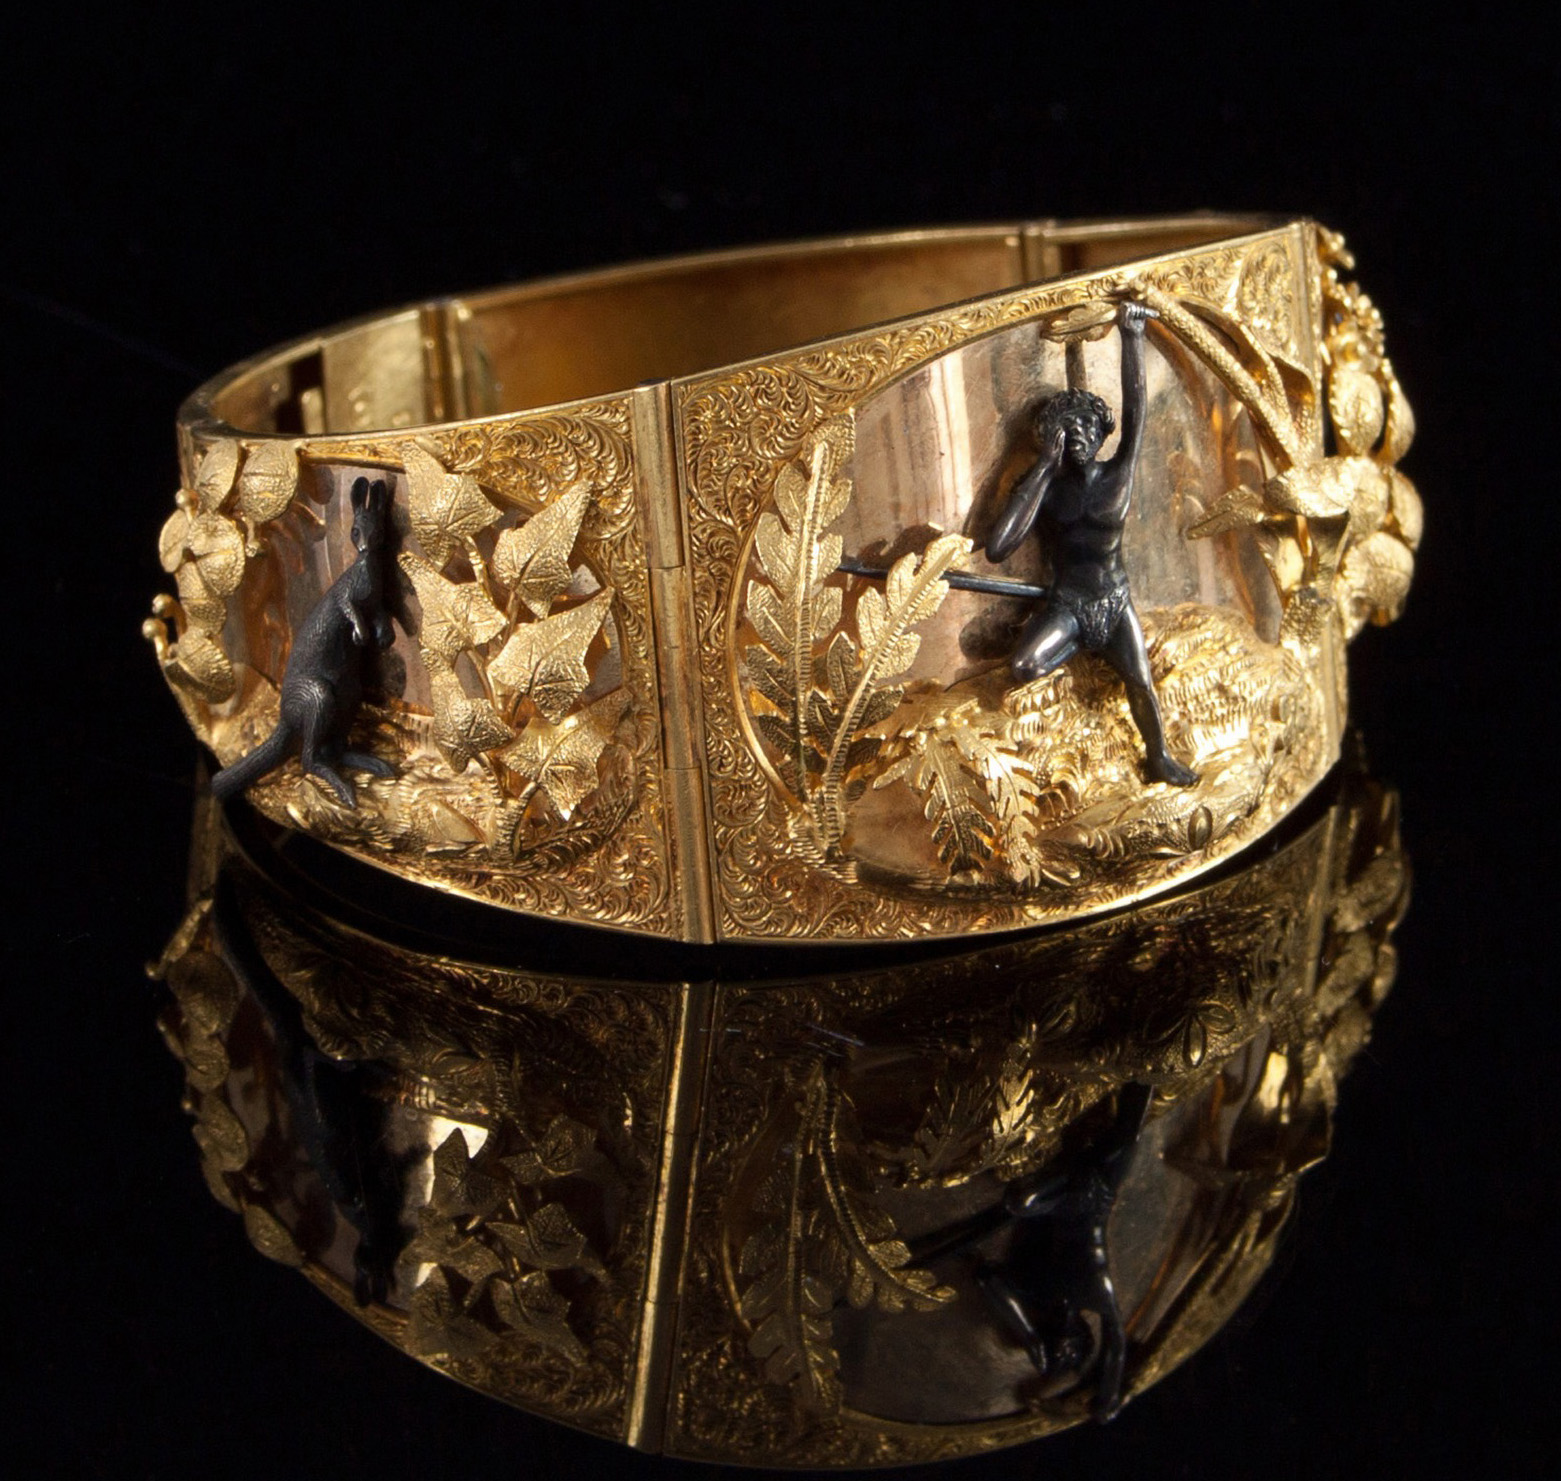 Australian sleepers are still being smoked out in foreign fields – internet or not. Two offerings have come to the attention of web based saleroom habitues attention lately. One was a group of attractive pieces of gold-fields jewellery in a UK regional auction in the heart of the Cotswolds, including a gold bracelet (above) which sold for £57,000 hammer, while the second was a hoard of objects offered in Tennessee associated with the American ship, the Shenandoah, that visited Melbourne during the Civil War